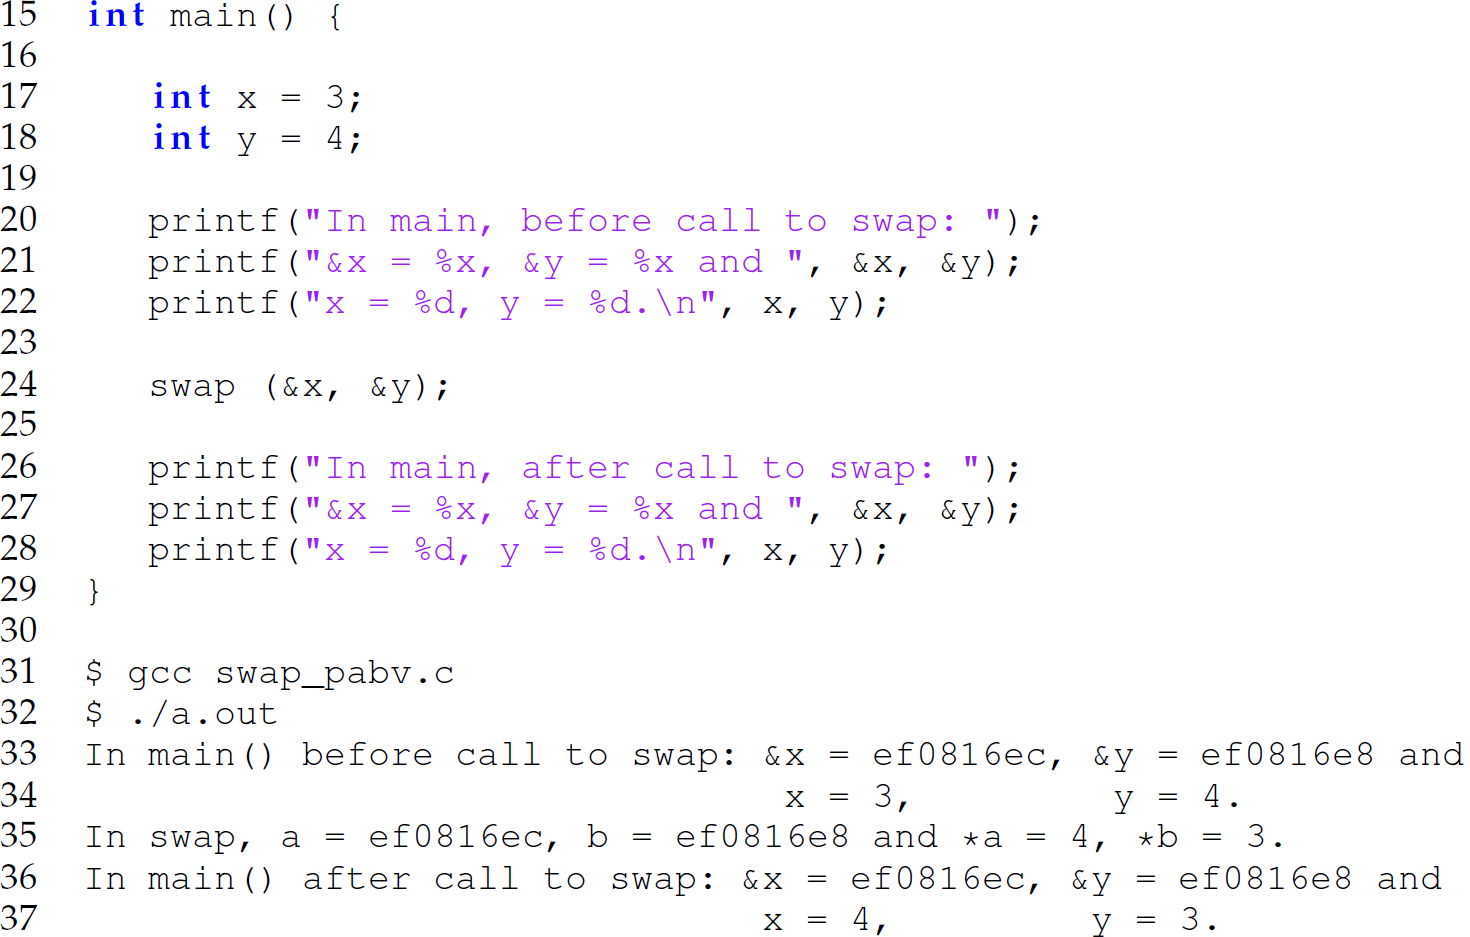 Continuation of the code in C with the simulated-pass-by-reference analog, consisting of 23 lines.